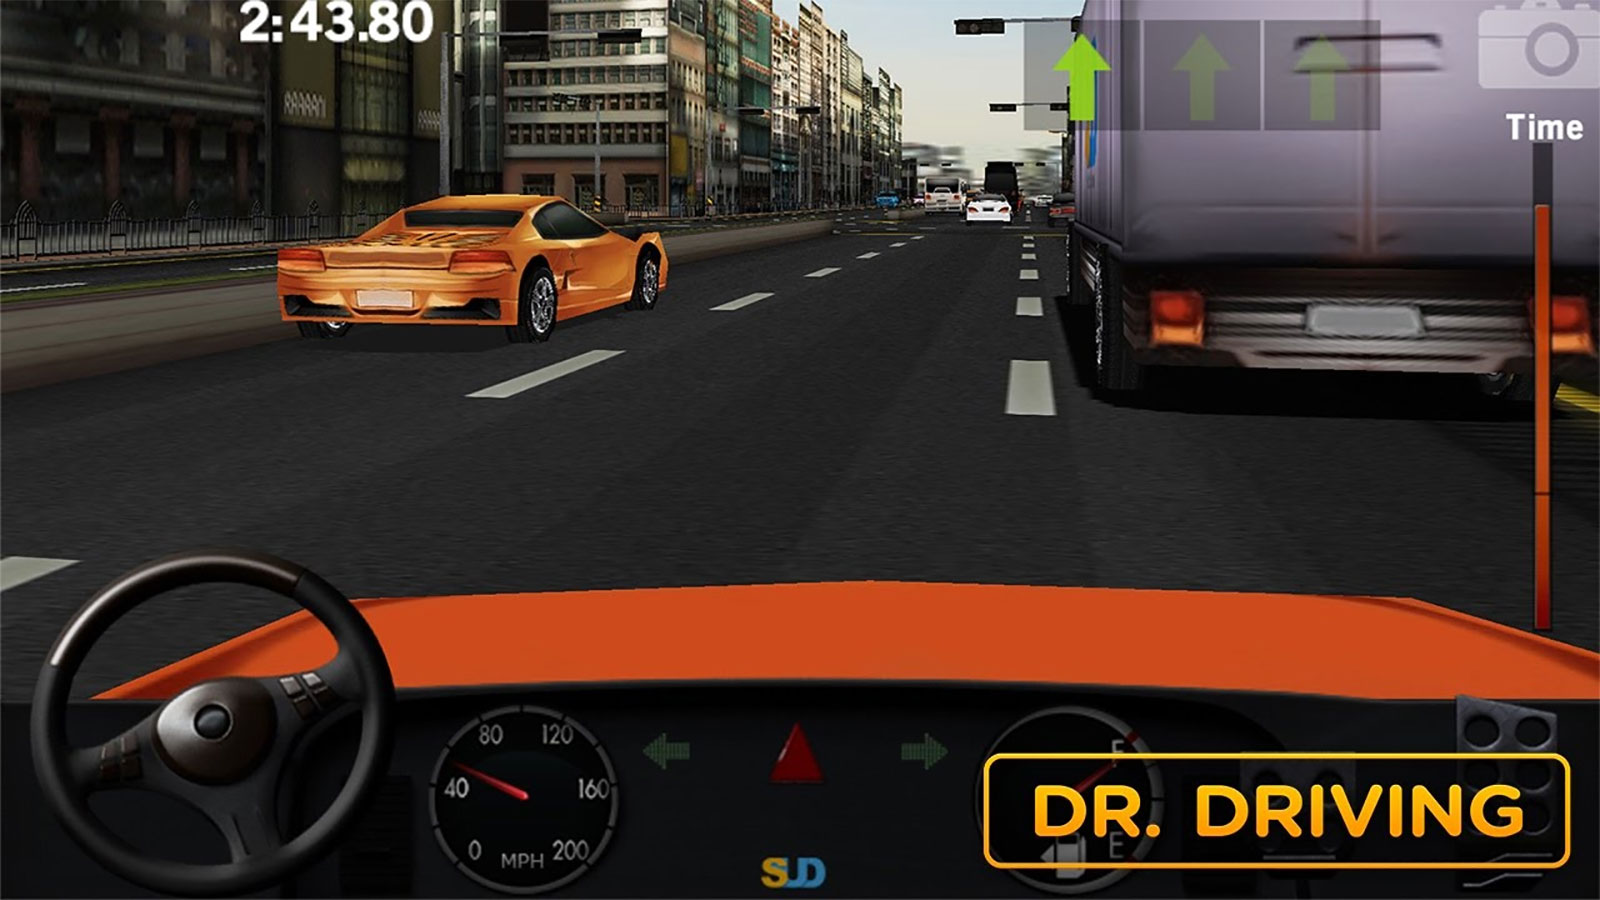 Download Dr Driving Mod Apk 1 55 Unlimited Money Unlocked For Android